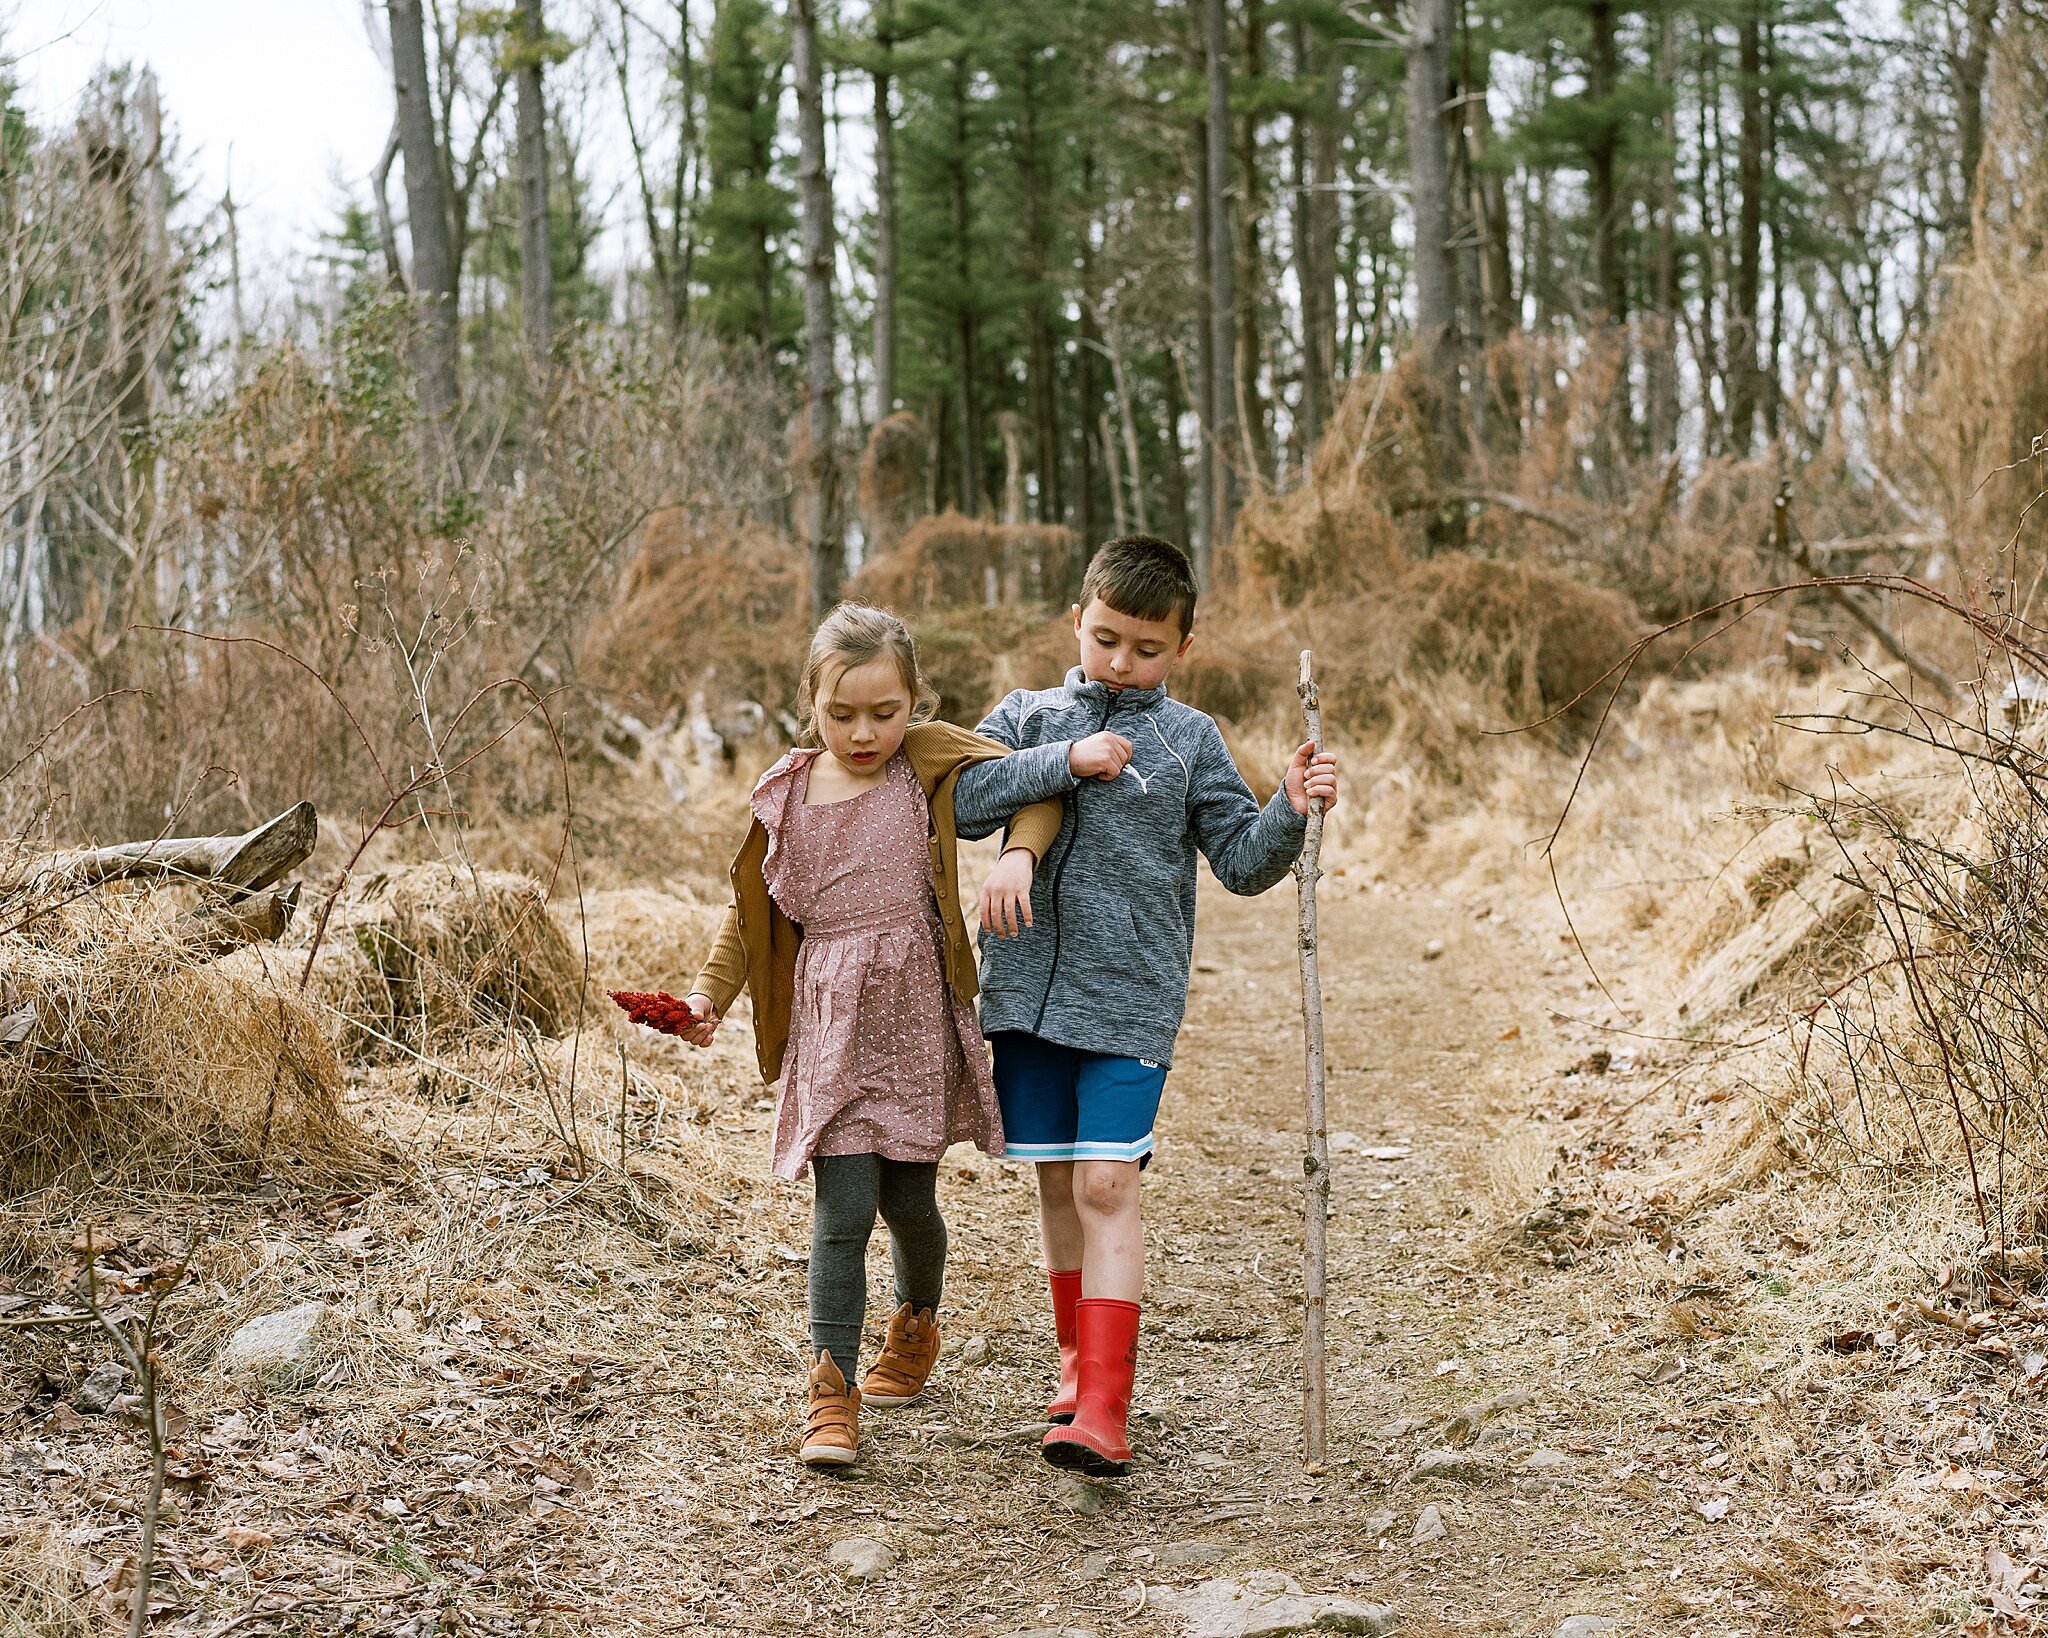 When my youngest fell and cut her leg climbing trees with the boys, my middle son helped her walk back to the nature center. I love when siblings show compassion and kindness to one another even when they tend to fight like crazy at home.